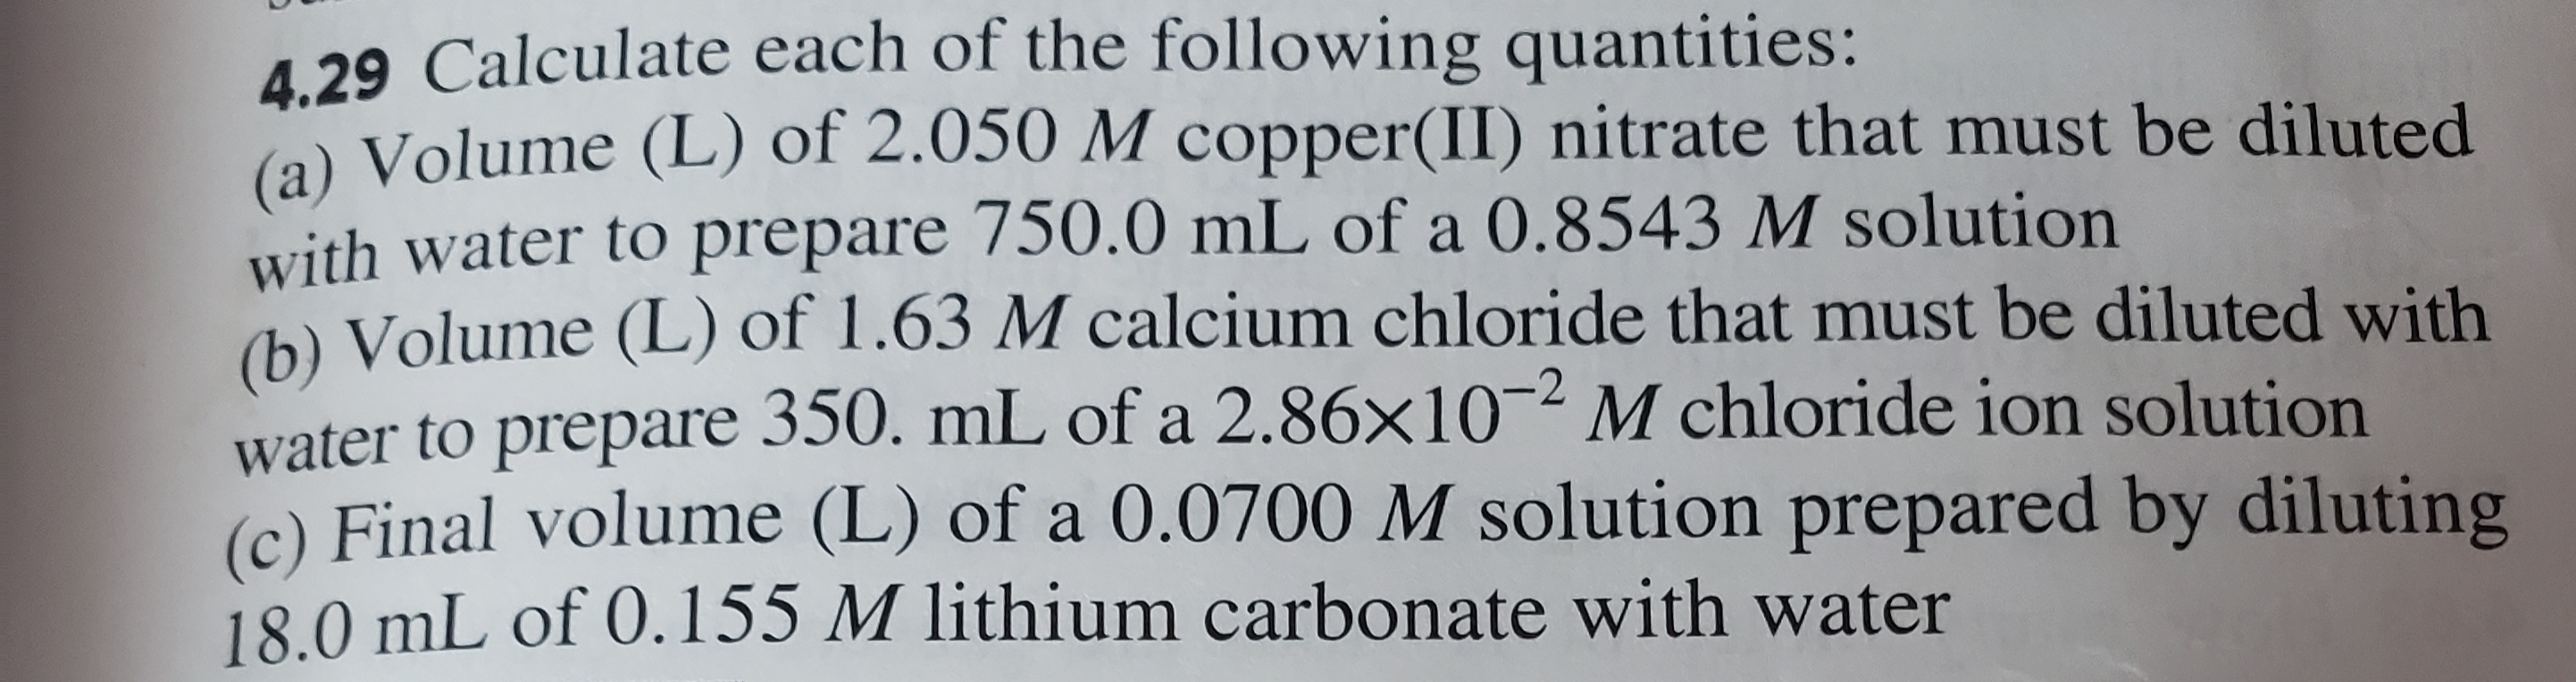 4.29 Calculate each of the following quantities:
(a) Volume (L) of 2.050 M copper(II) nitrate that must be diluted
with water to prepare 750.0 mL of a 0.8543 M solution
)Volume (L) of 1.63 M calcium chloride that must be diluted with
water to prepare 350. mL of a 2.86x10 M chloride ion solution
(c) Final volume (L) of a 0.0700 M solution prepared by diluting
18.0 mL of 0.155 M lithium carbonate with water
